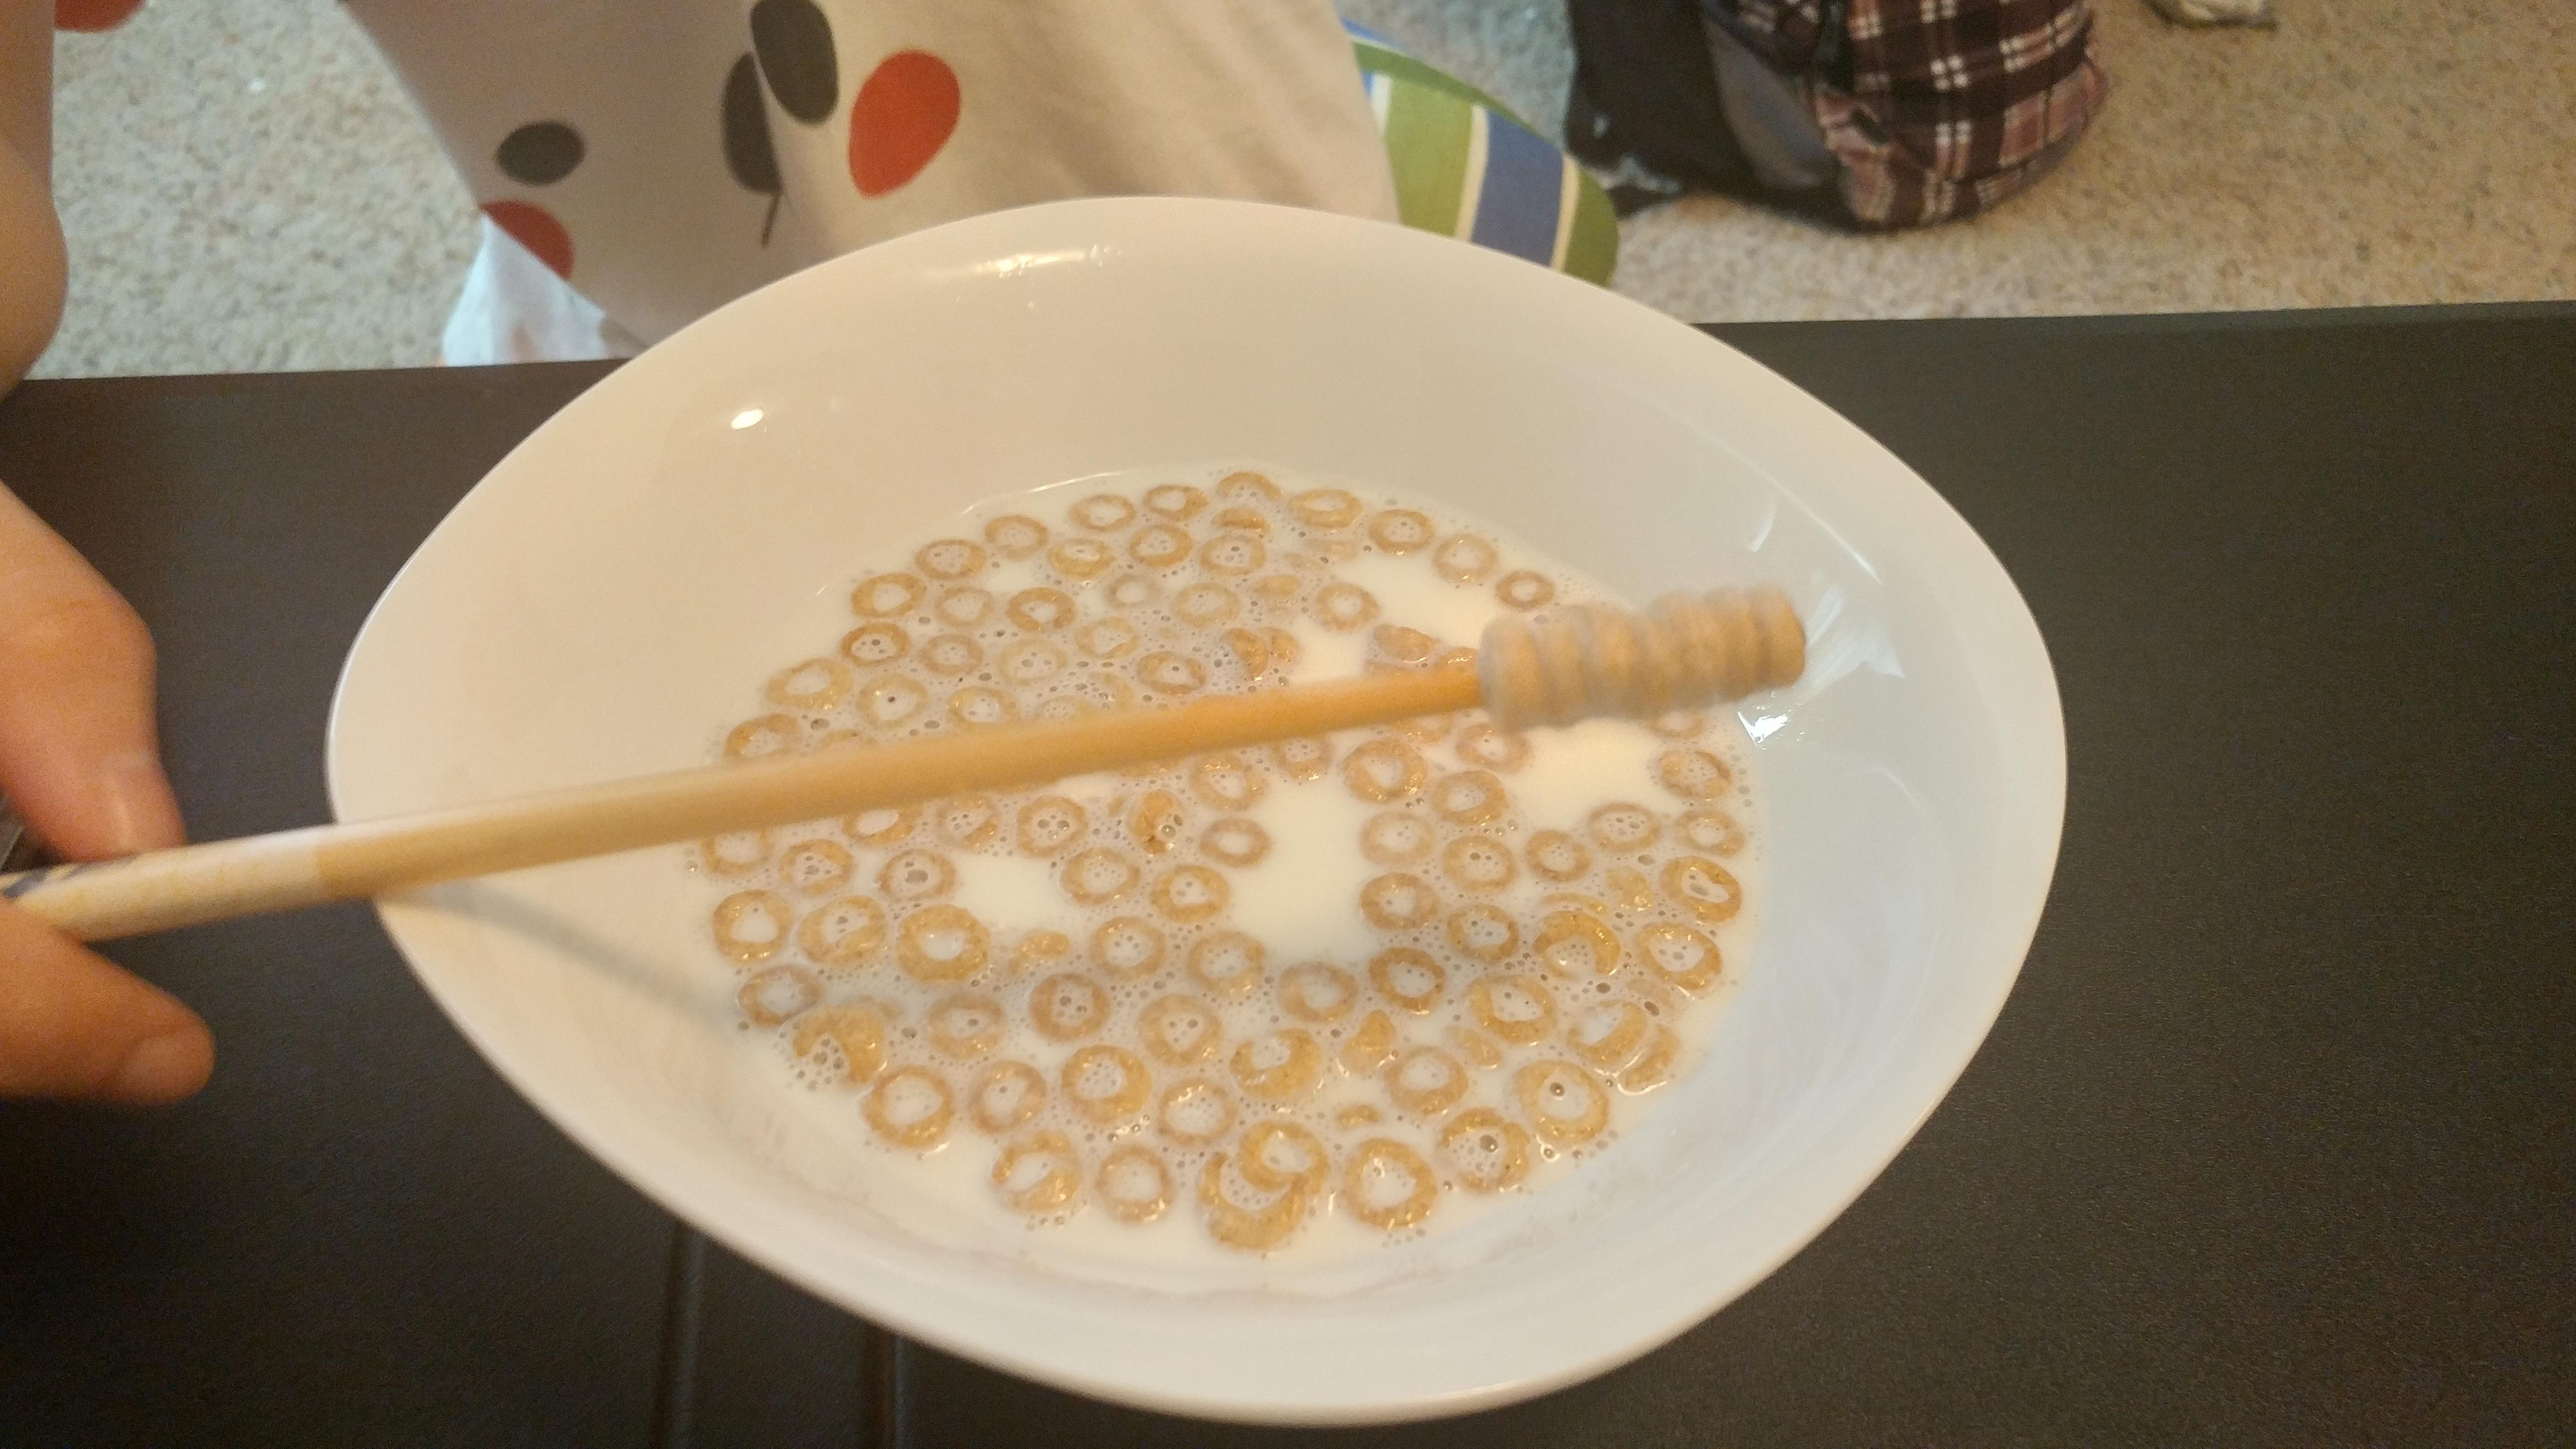 My girlfriend never ate cereal before coming to the US